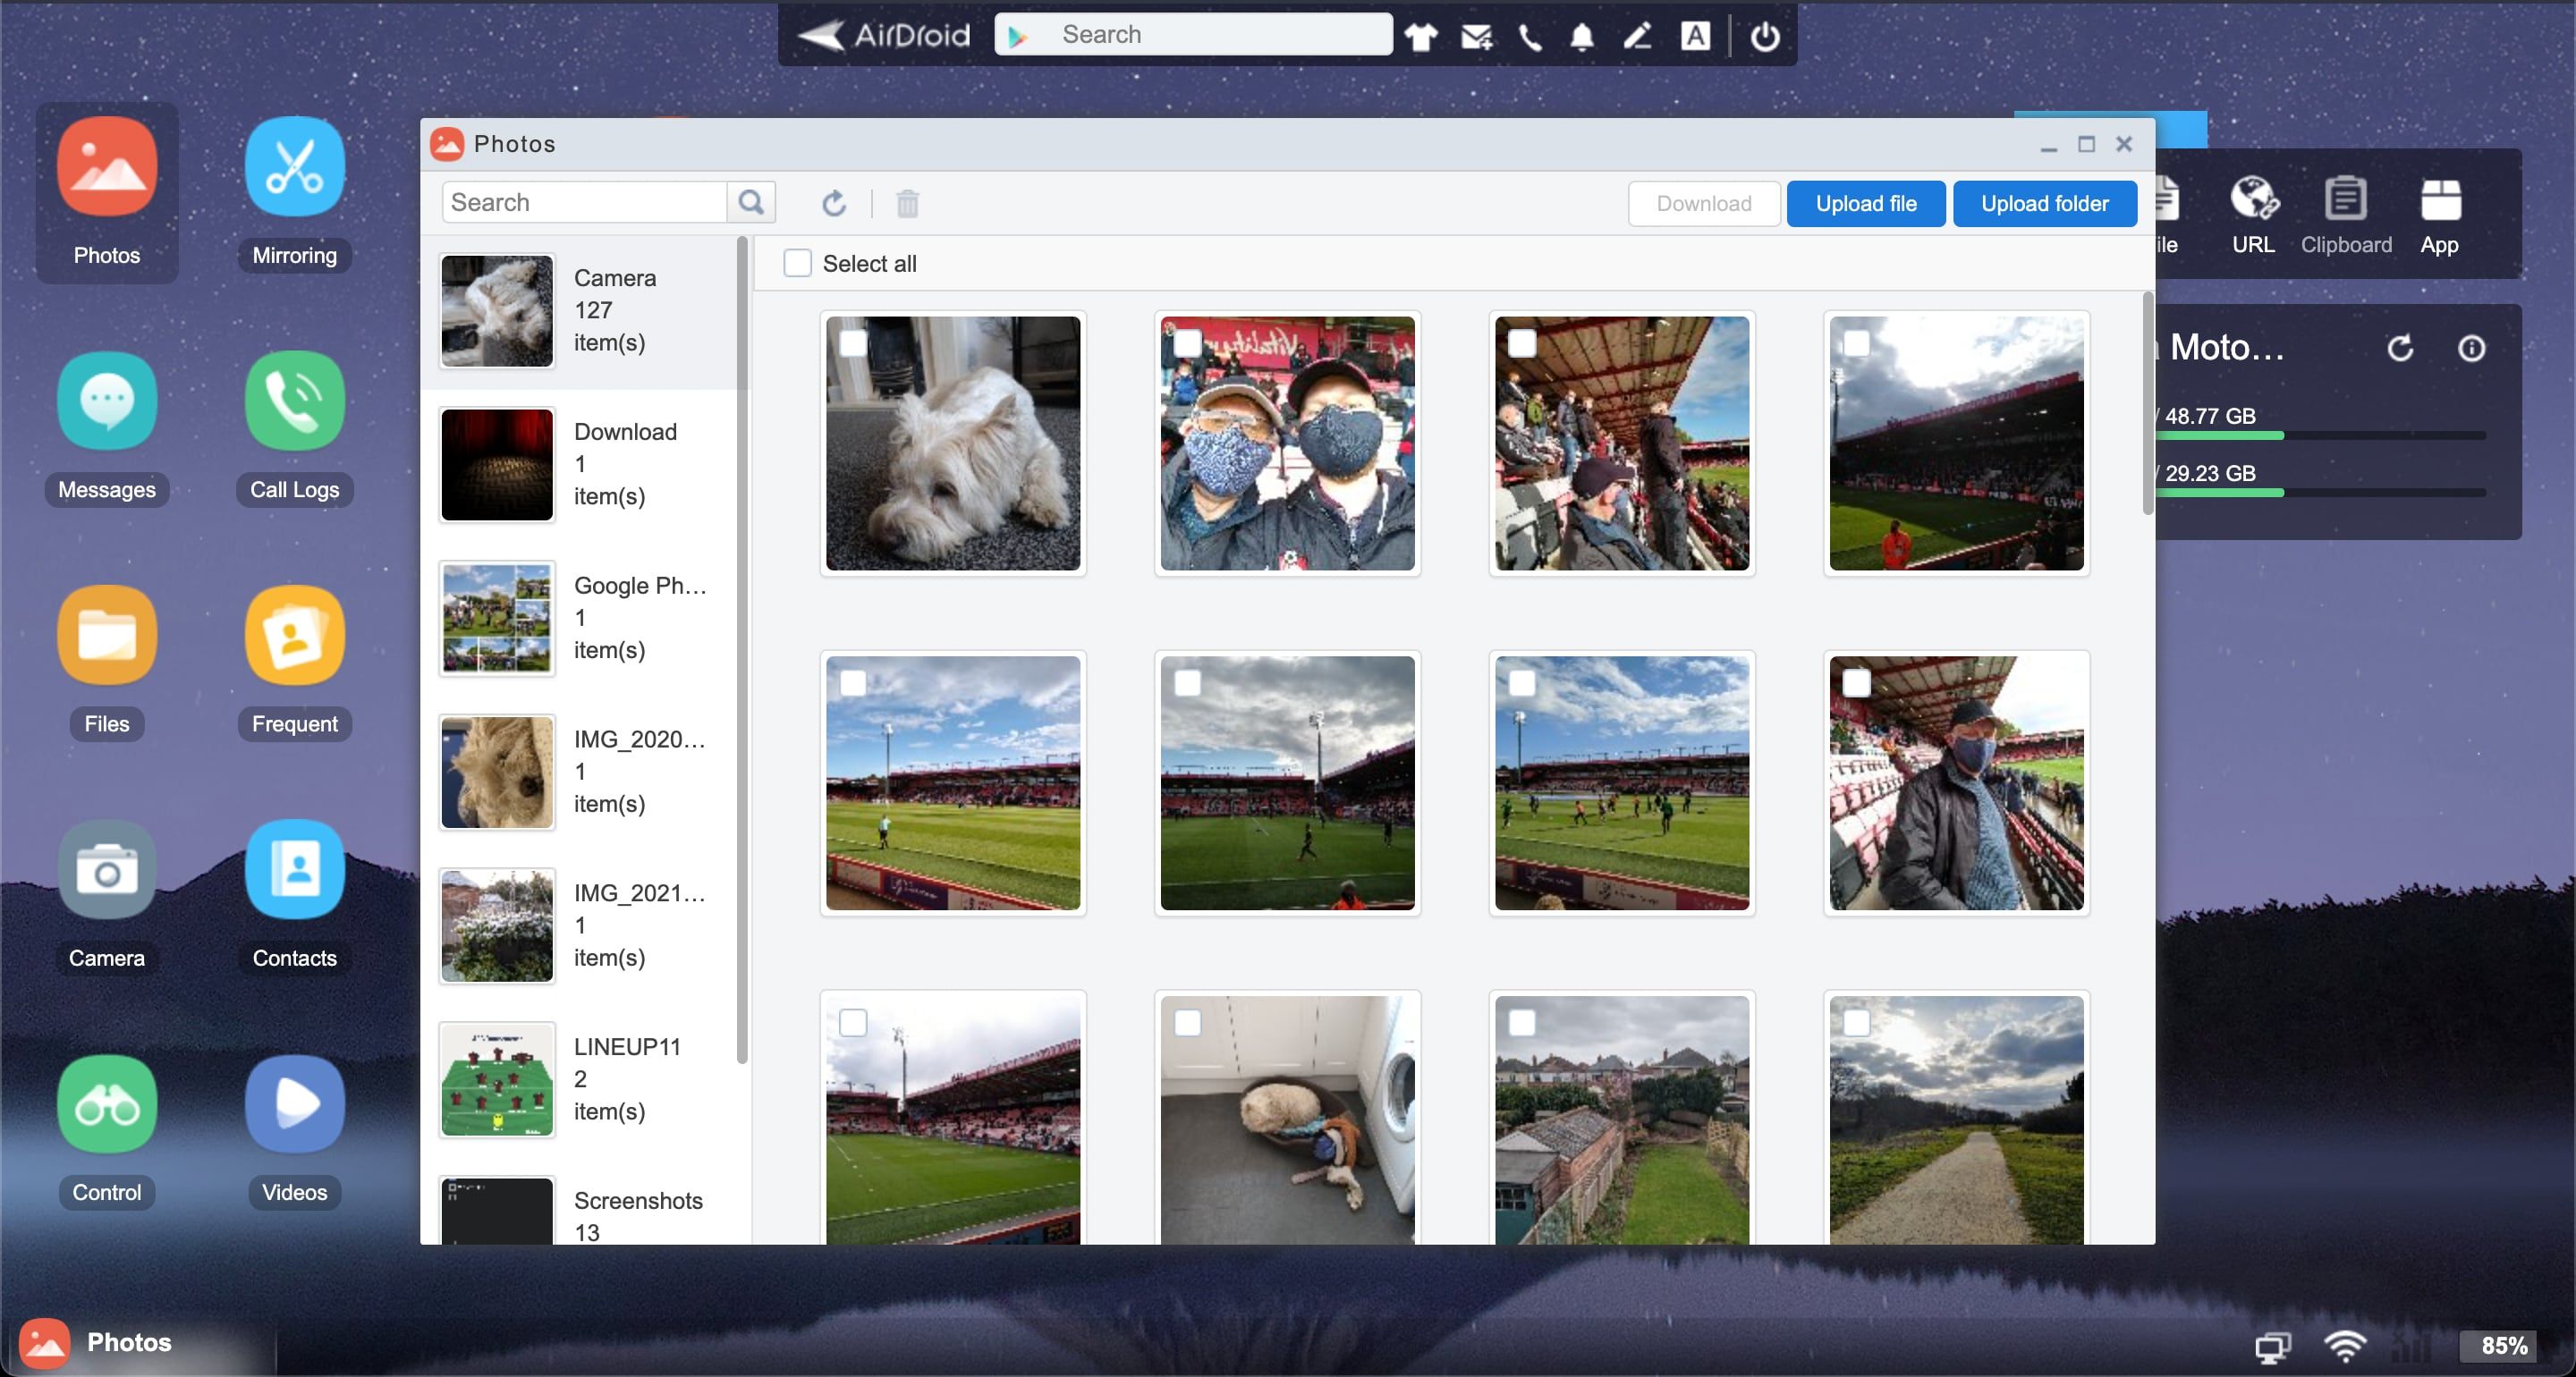 access photo gallery on airdroid